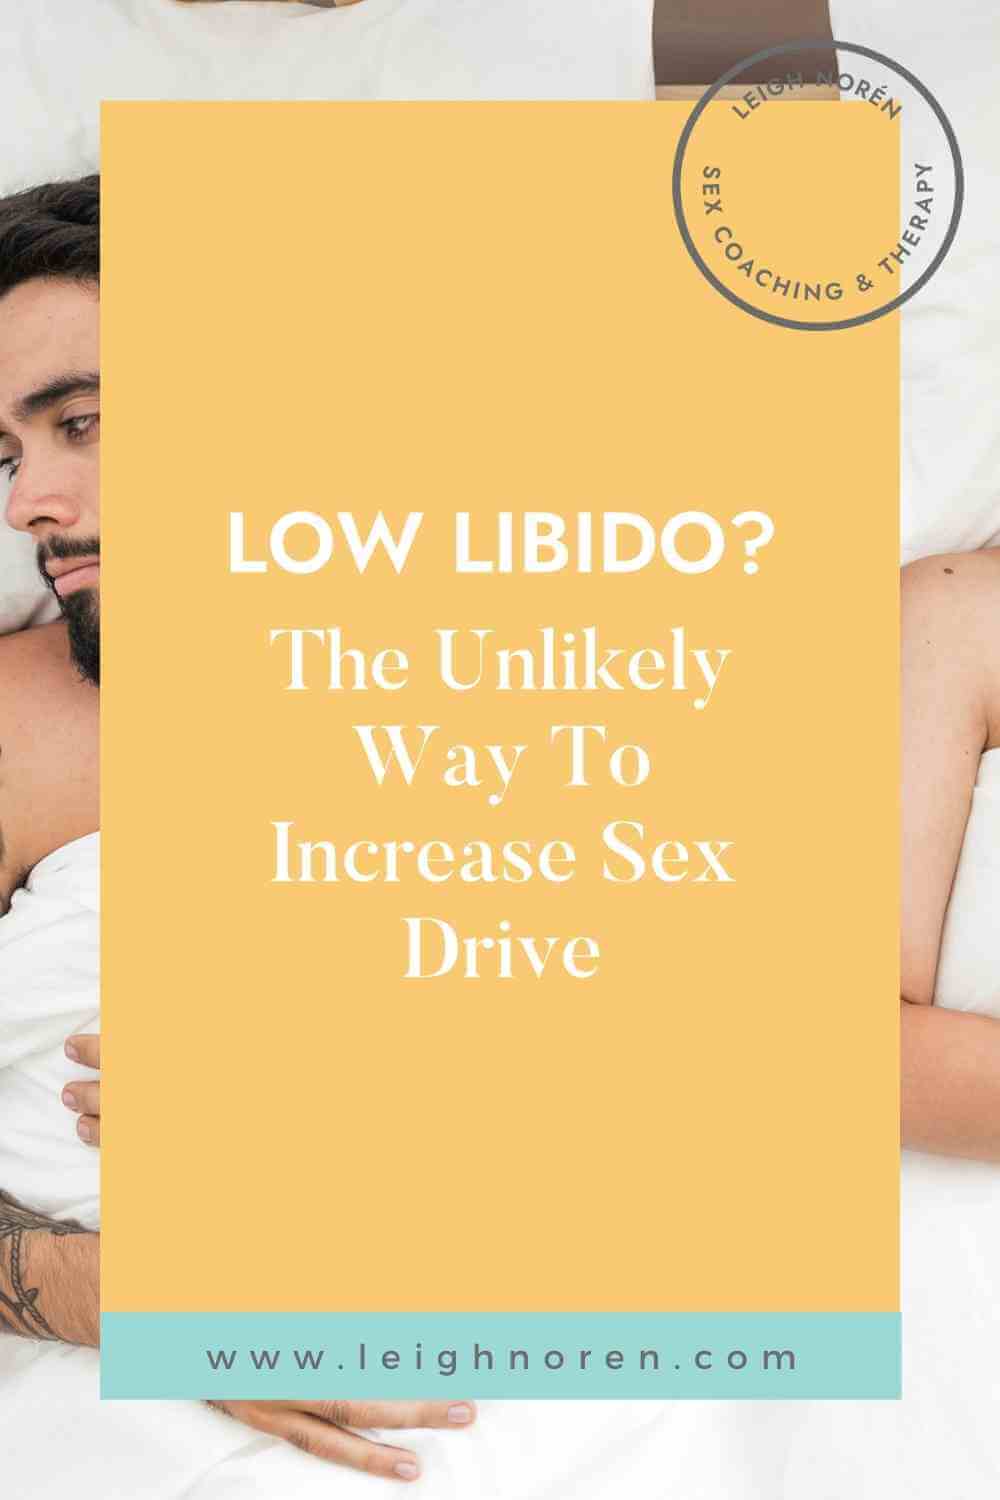 Low Libido? The Unlikely Way To Increase Sex Drive